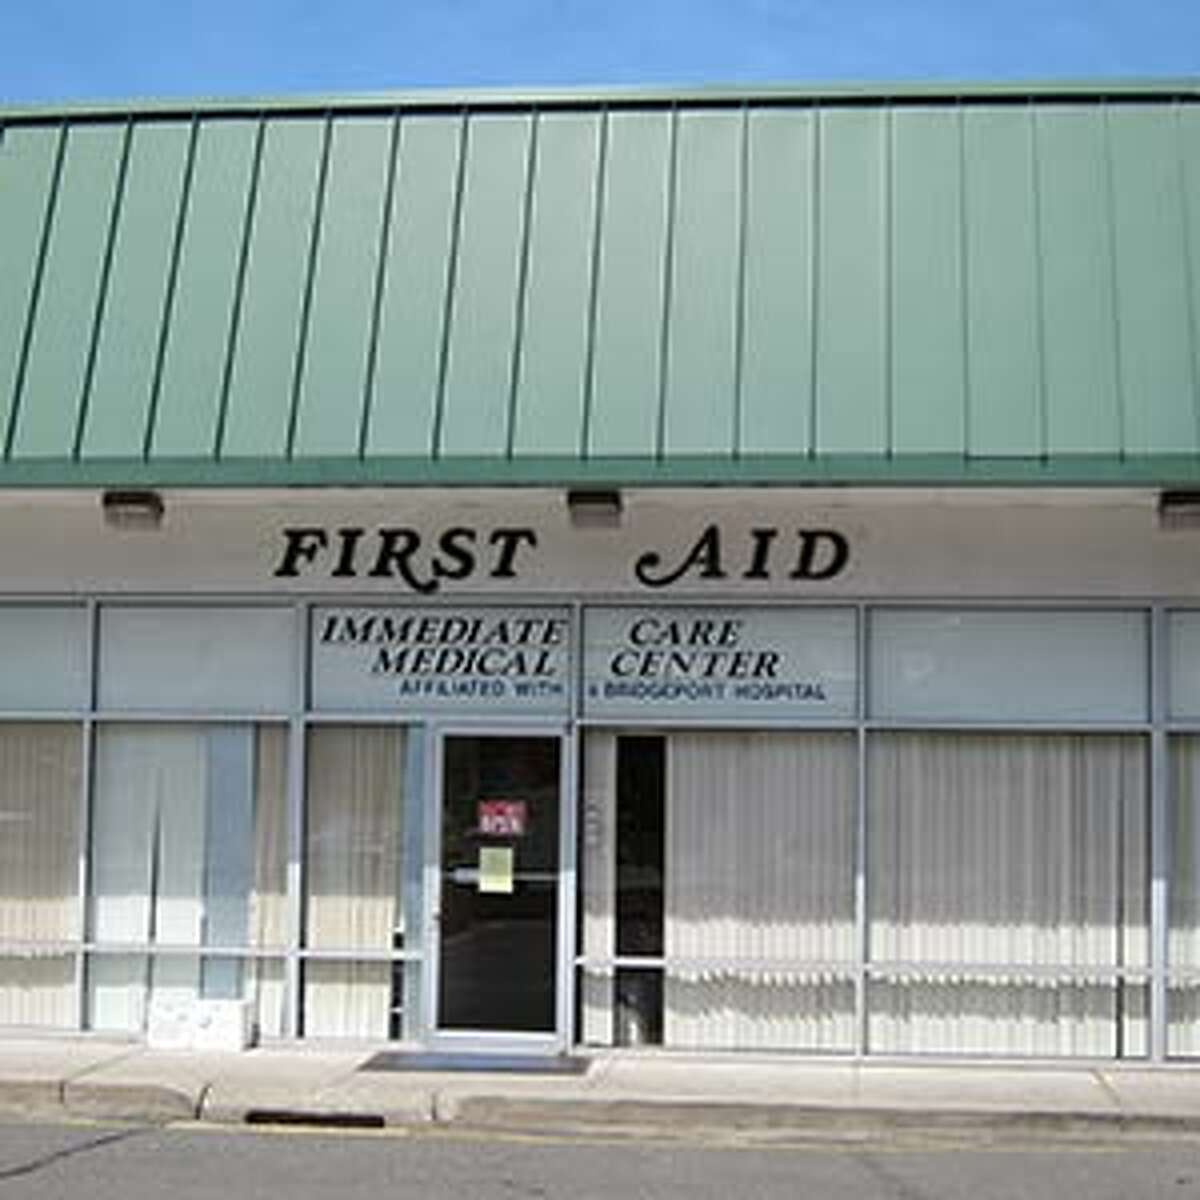 First Aid Immediate Care Medical Center's front door on White Plains Road.